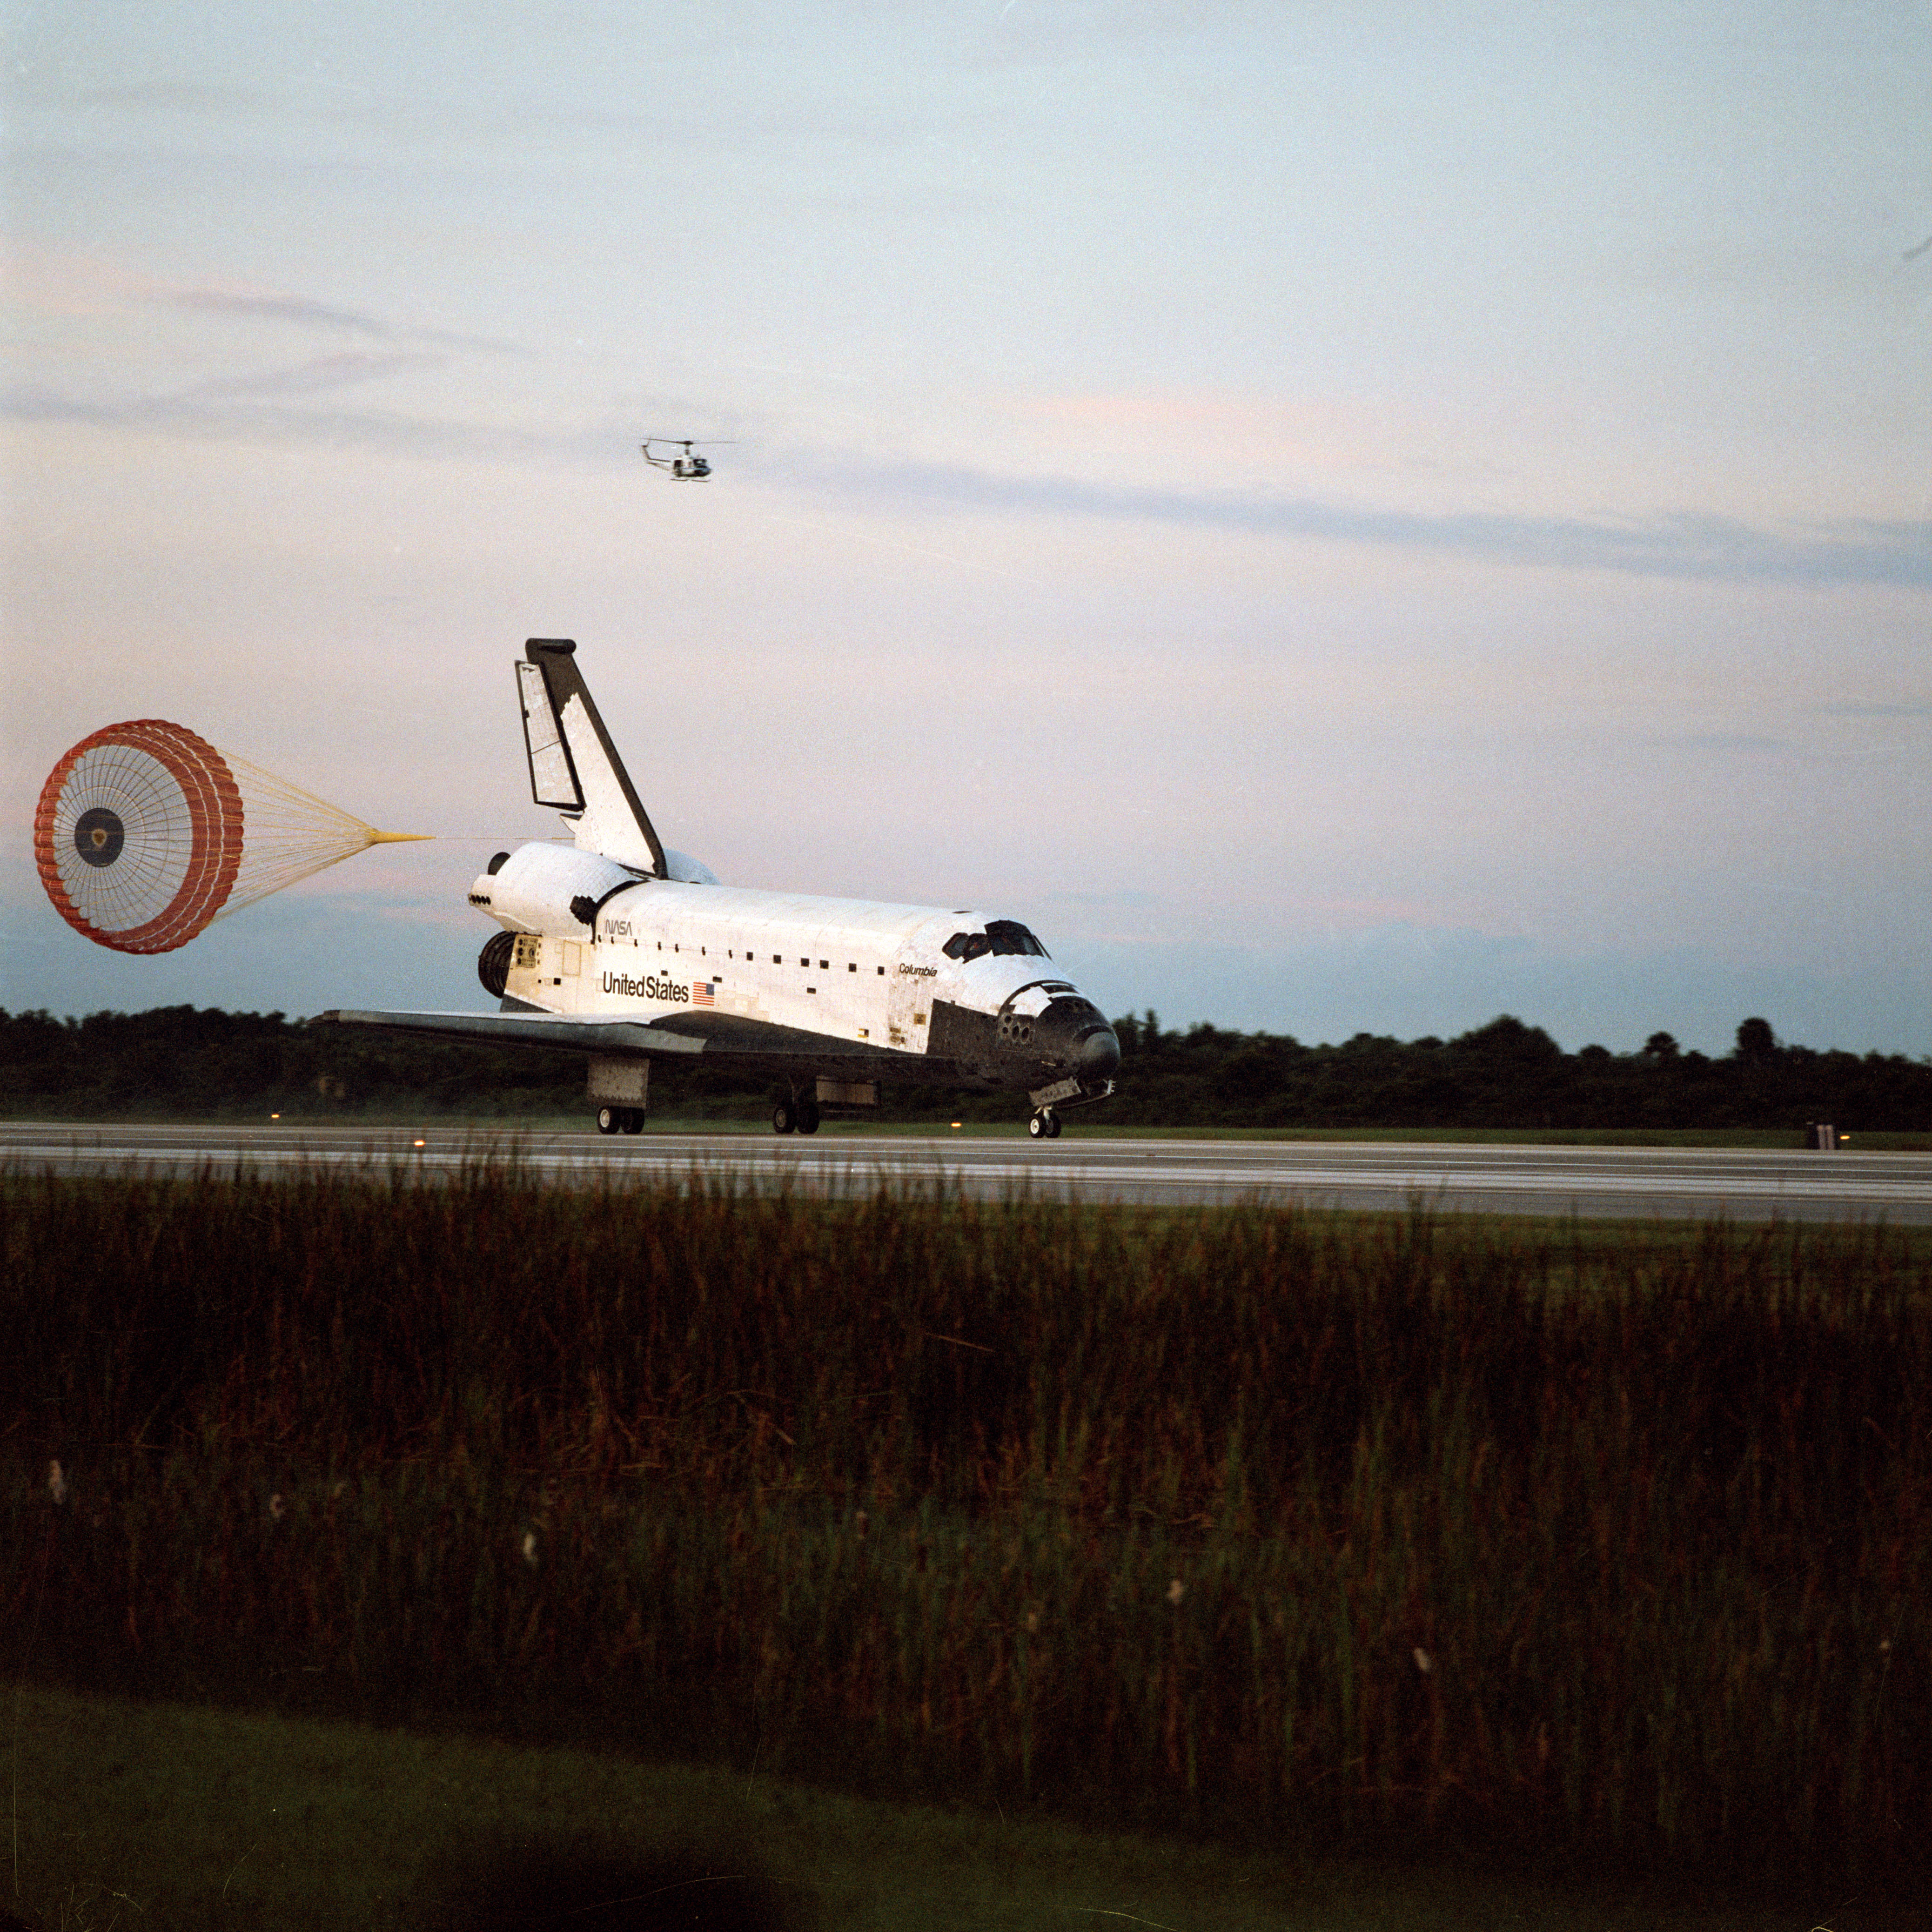 Columbia touches down on KSC’s Shuttle Landing Facility to end the STS-65 mission